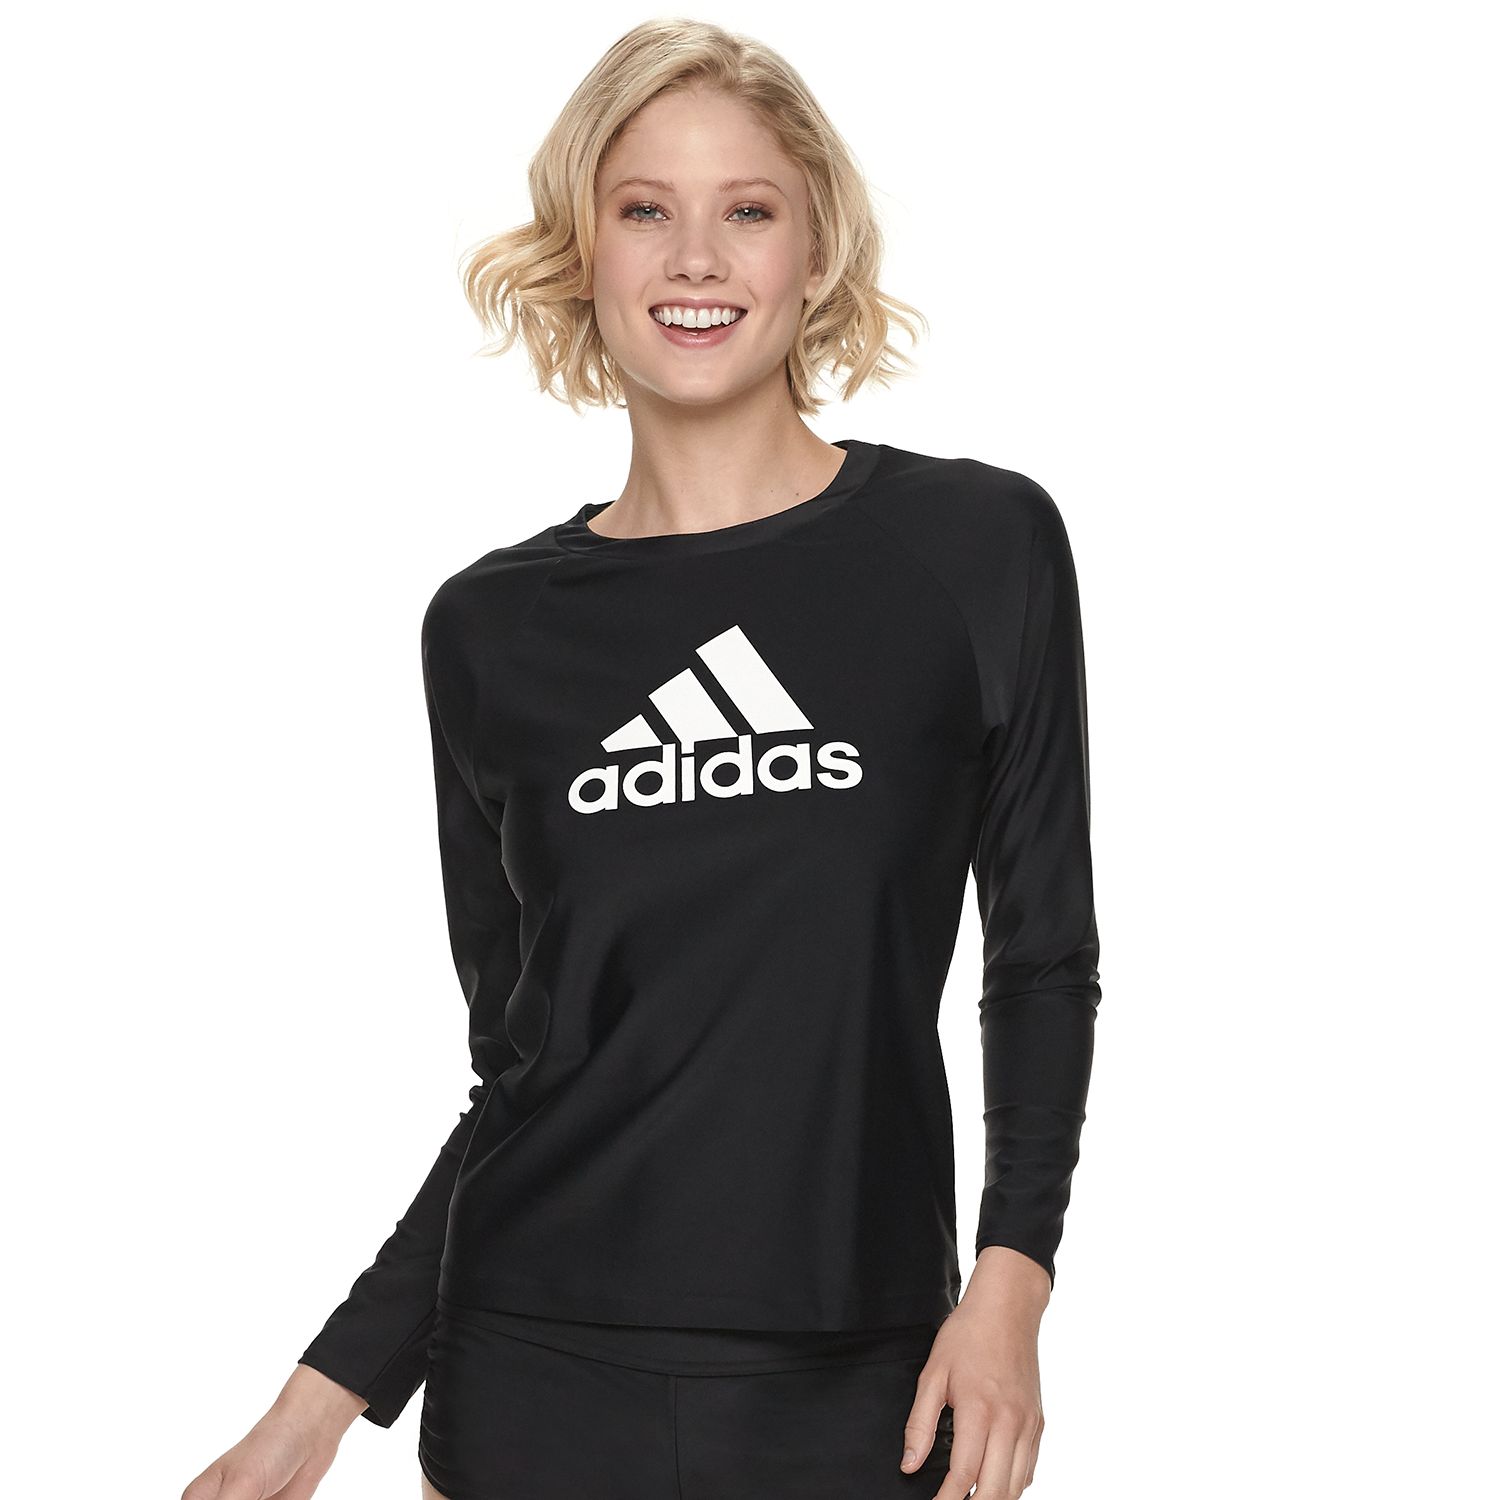 Women's adidas Relaxed Fit Rash Guard